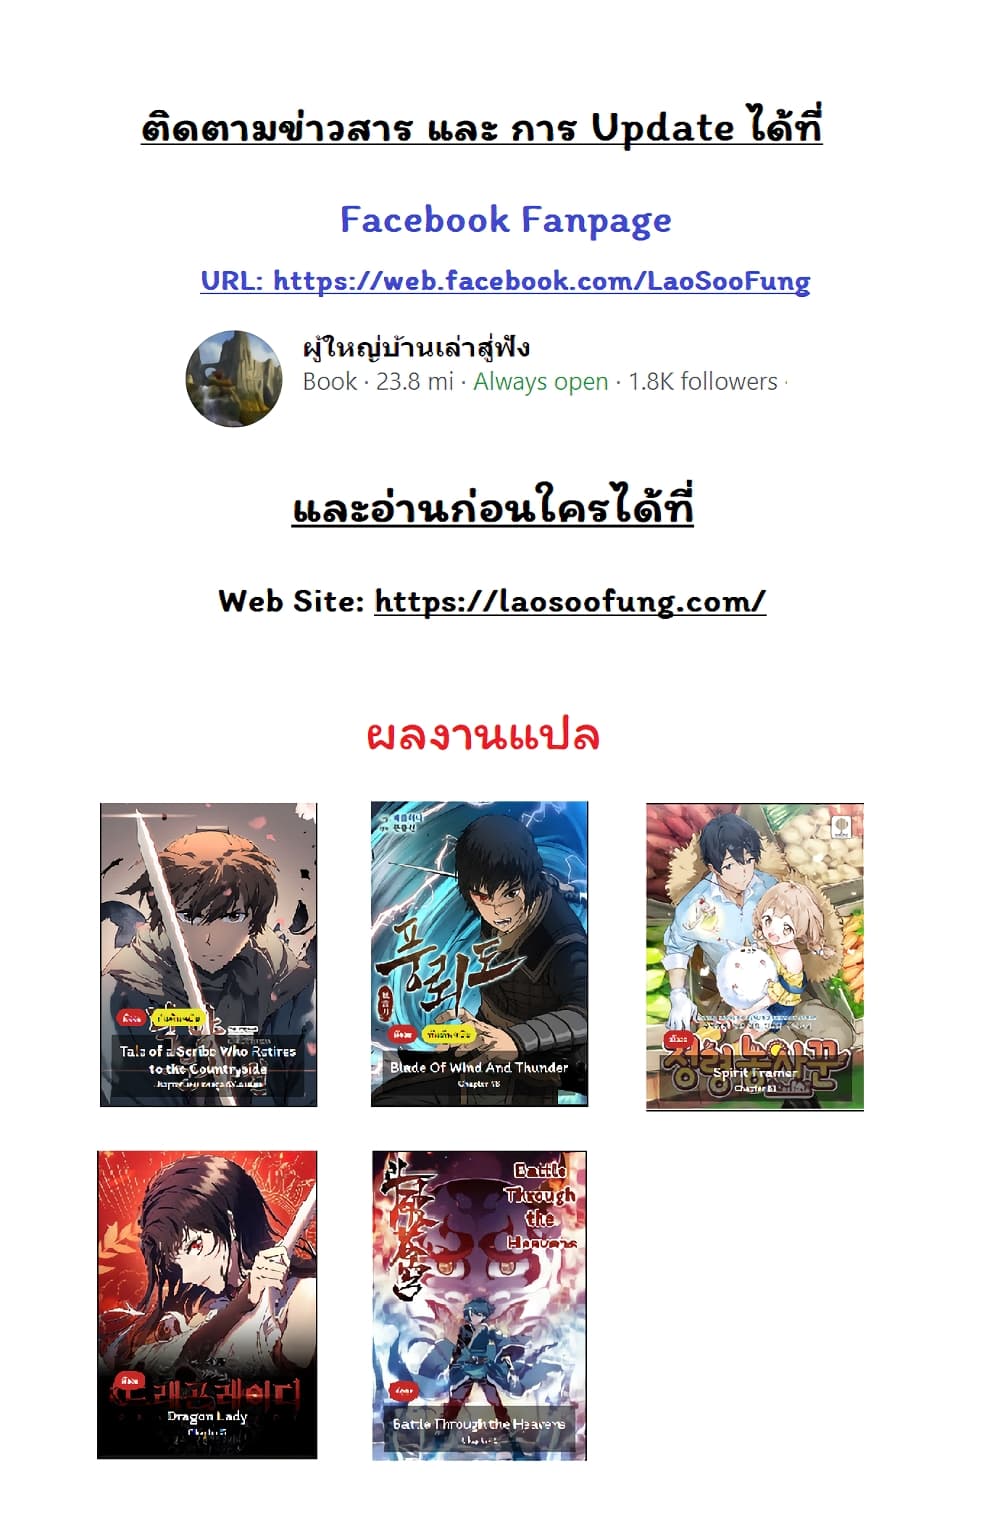 Blade of Winds and Thunders ตอนที่ 44 (20)